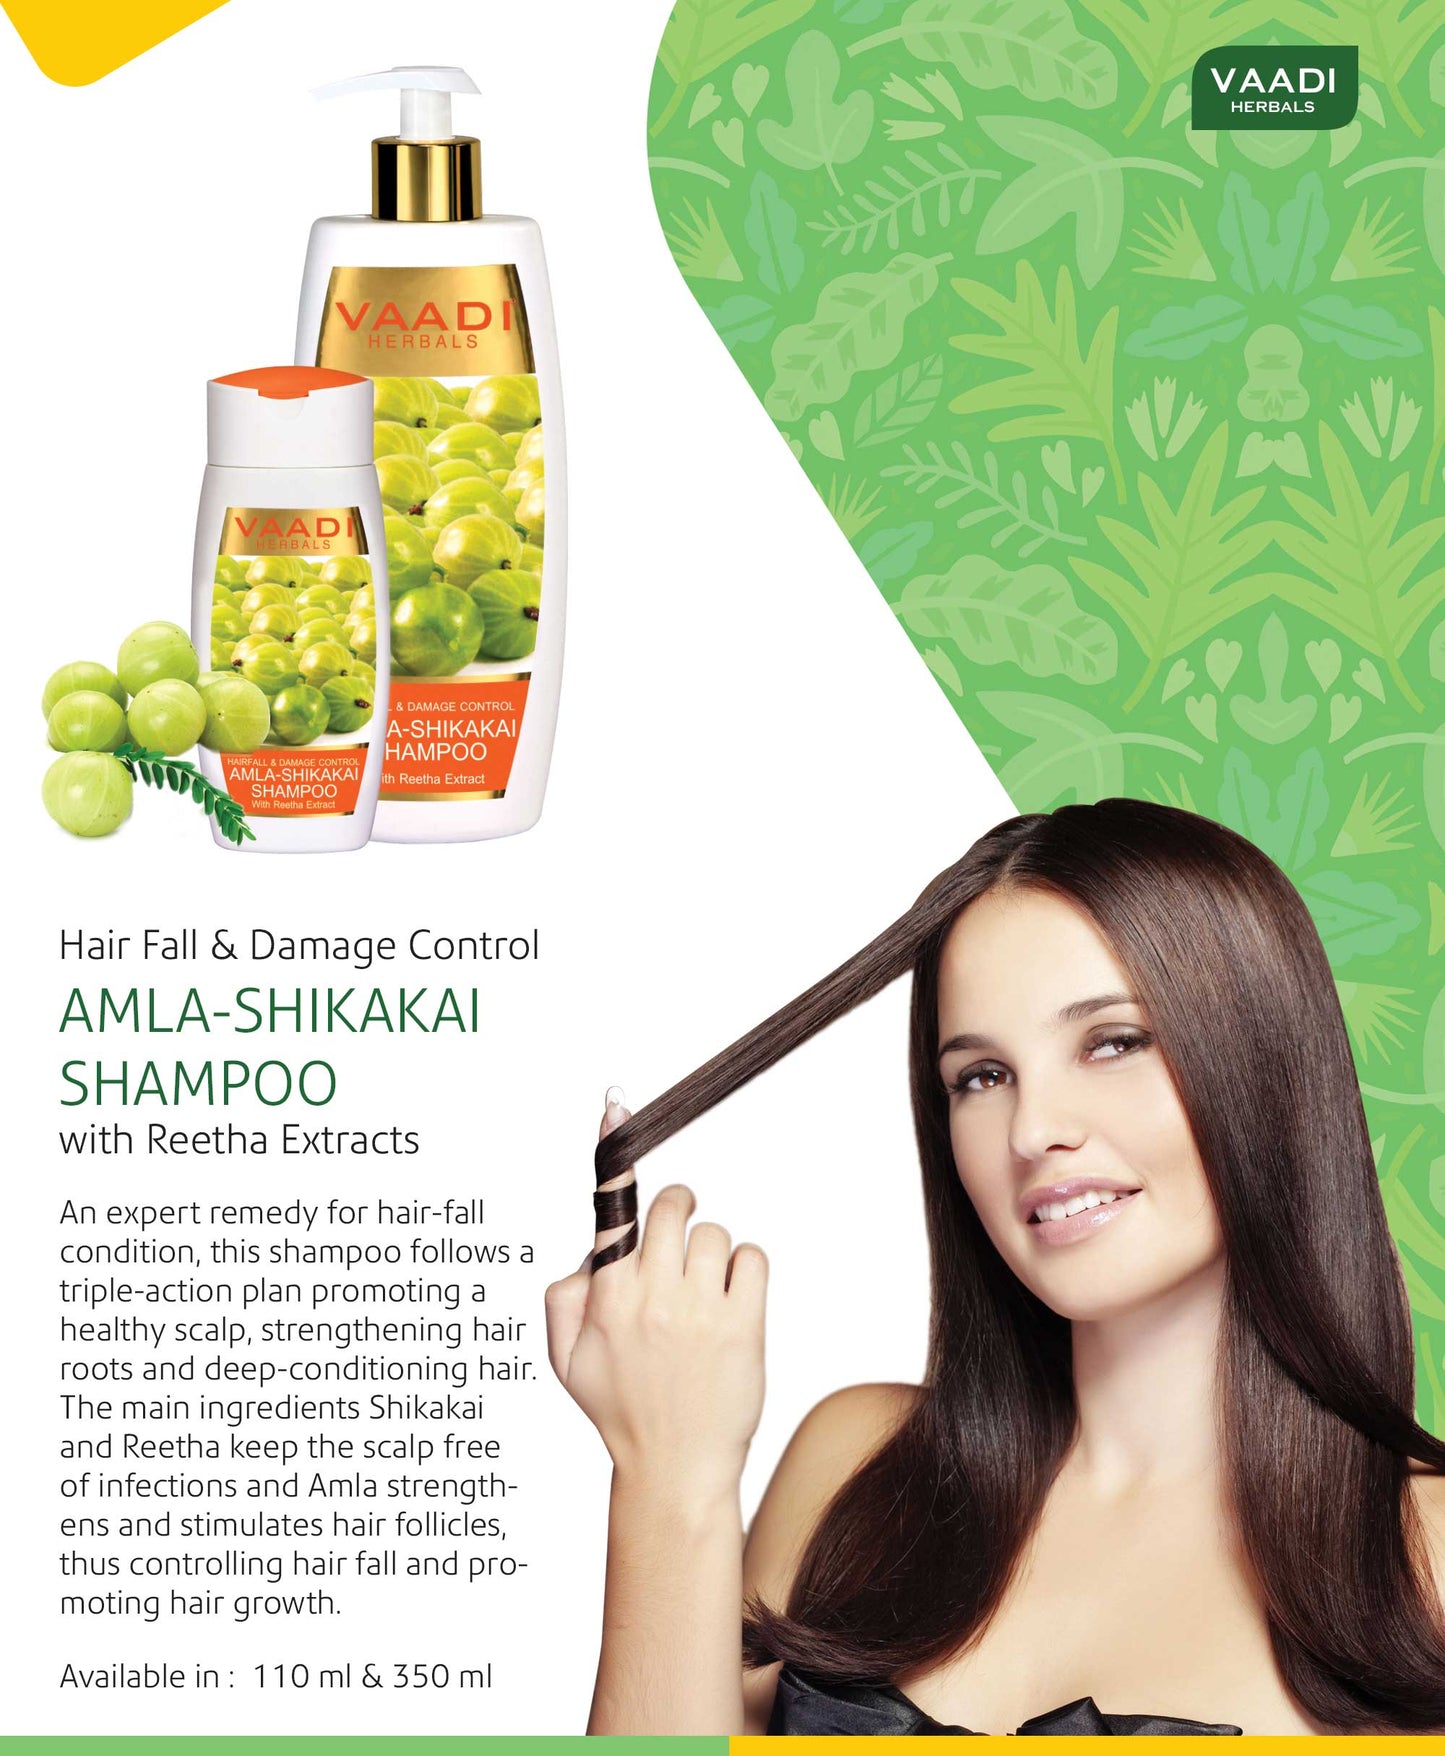 Hairfall & Damage Control Organic Shampoo (Indian Gooseberry Extract) - Promotes Hair Growth - Adds Shine to Hair (110 ml/4 fl oz)